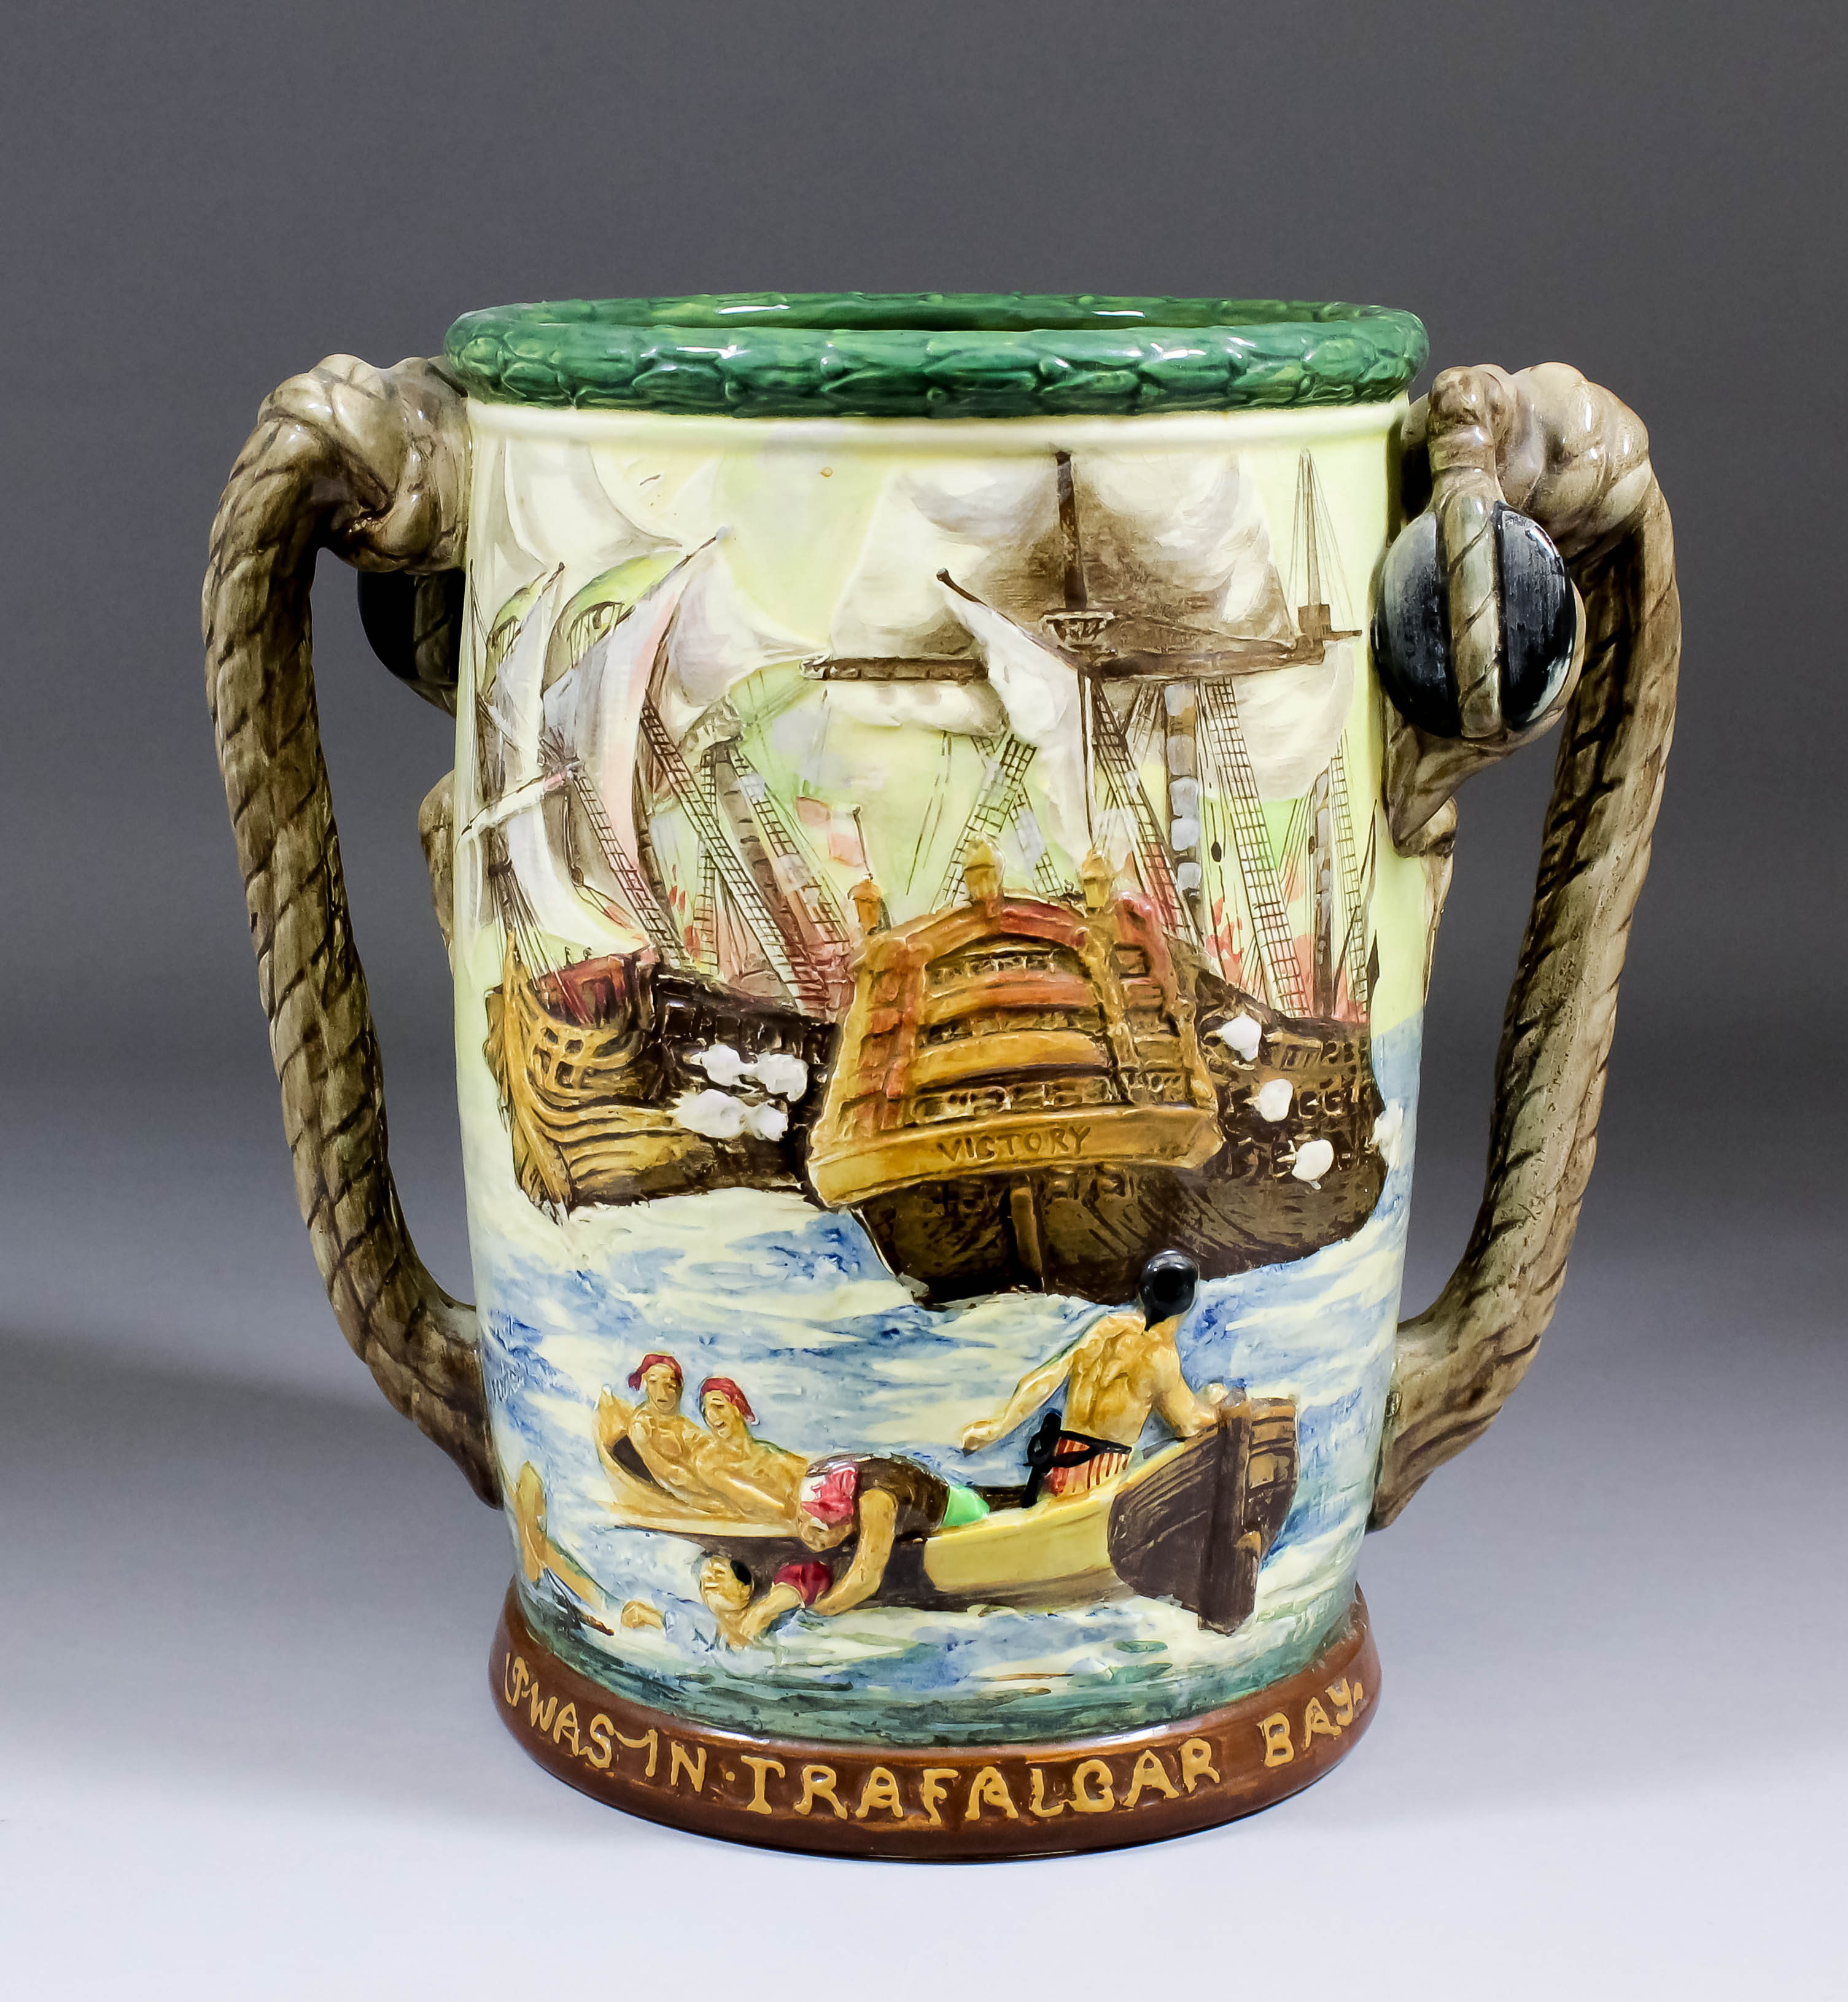 A Royal Doulton pottery "The Lord Nelson" two-handled loving cup designed by Charles Noke and